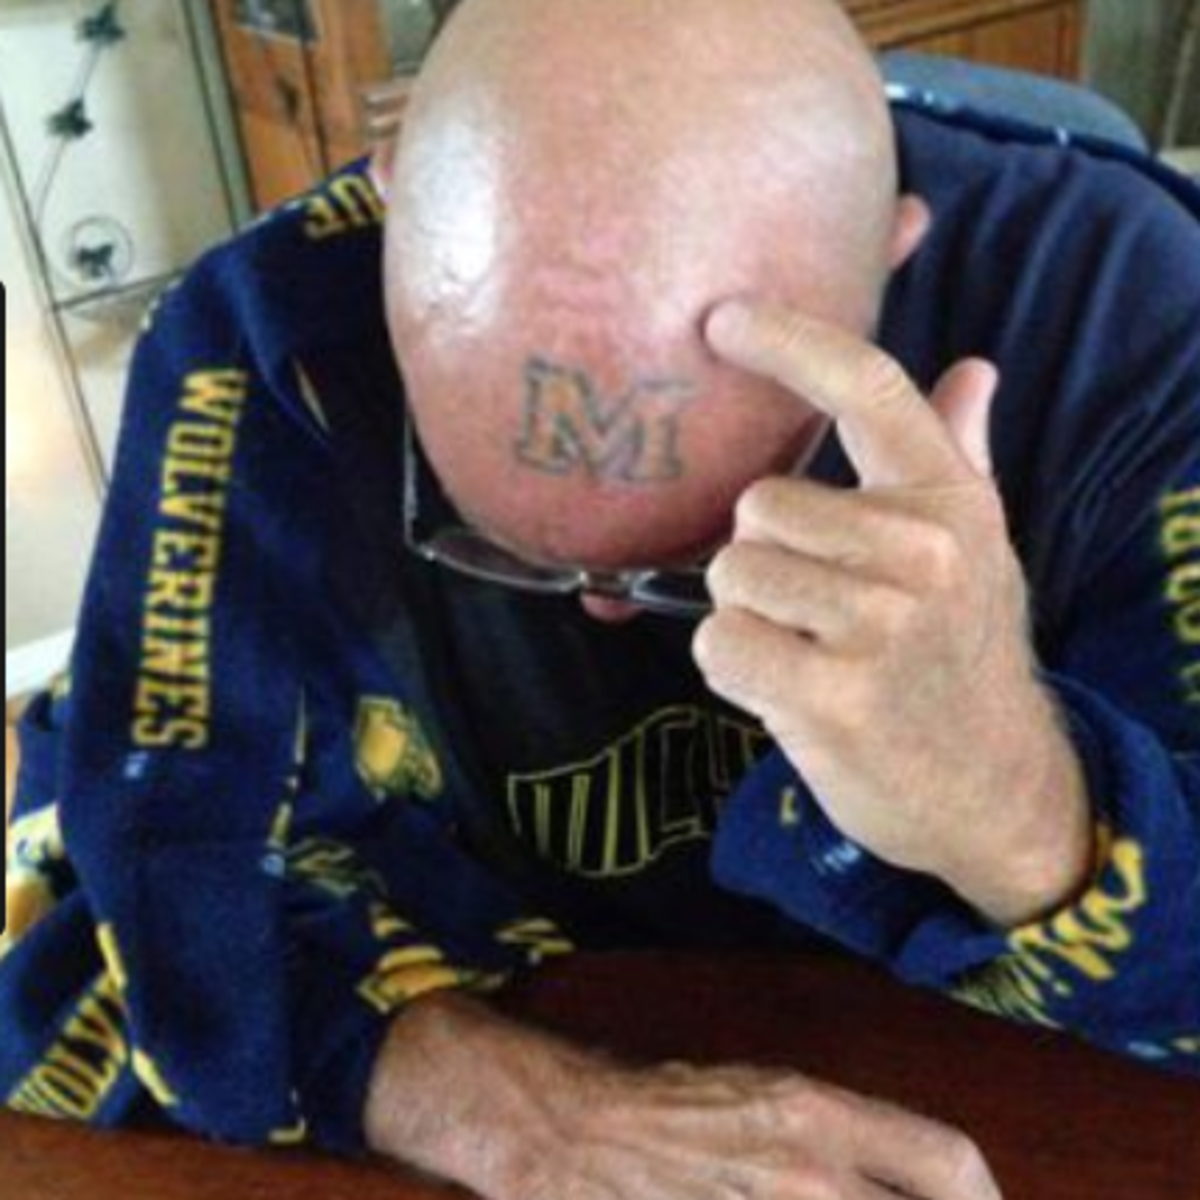 University of Michigan fans share photos of Wolverine themed tattoos   mlivecom